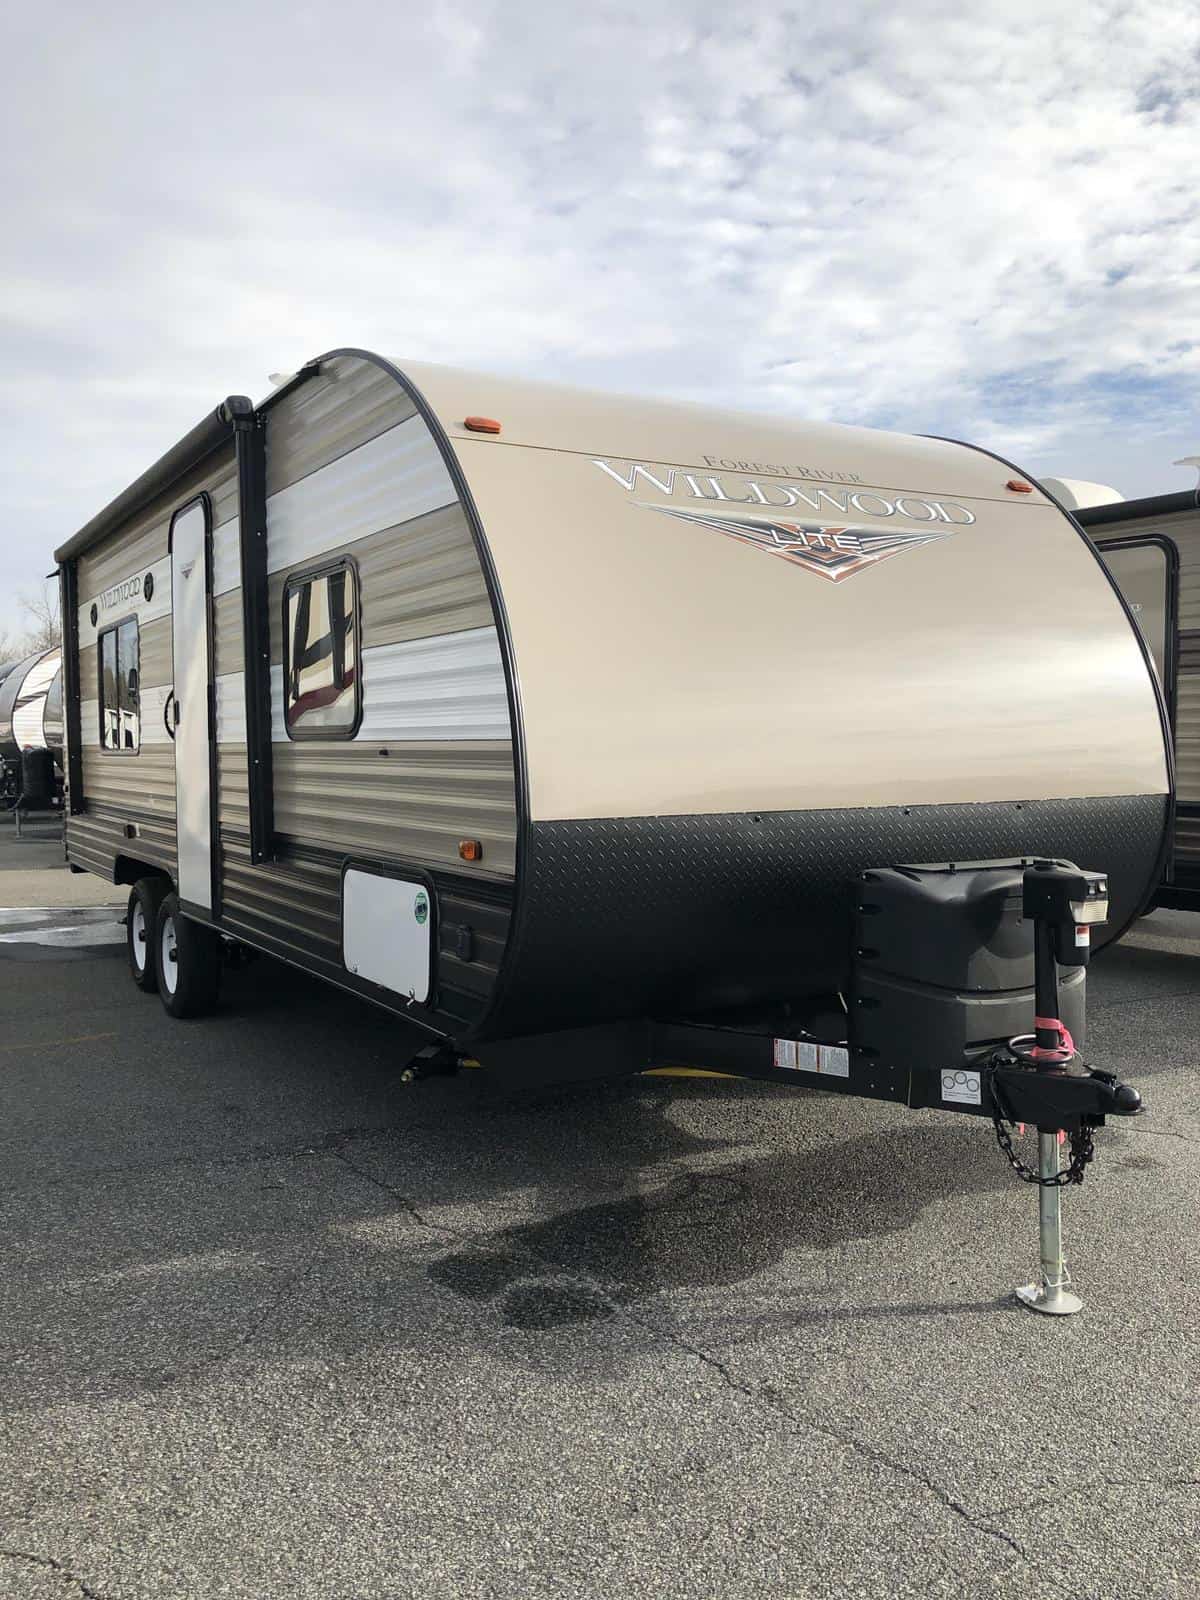 NEW 2019 Forest river Wildwood 241QBXL